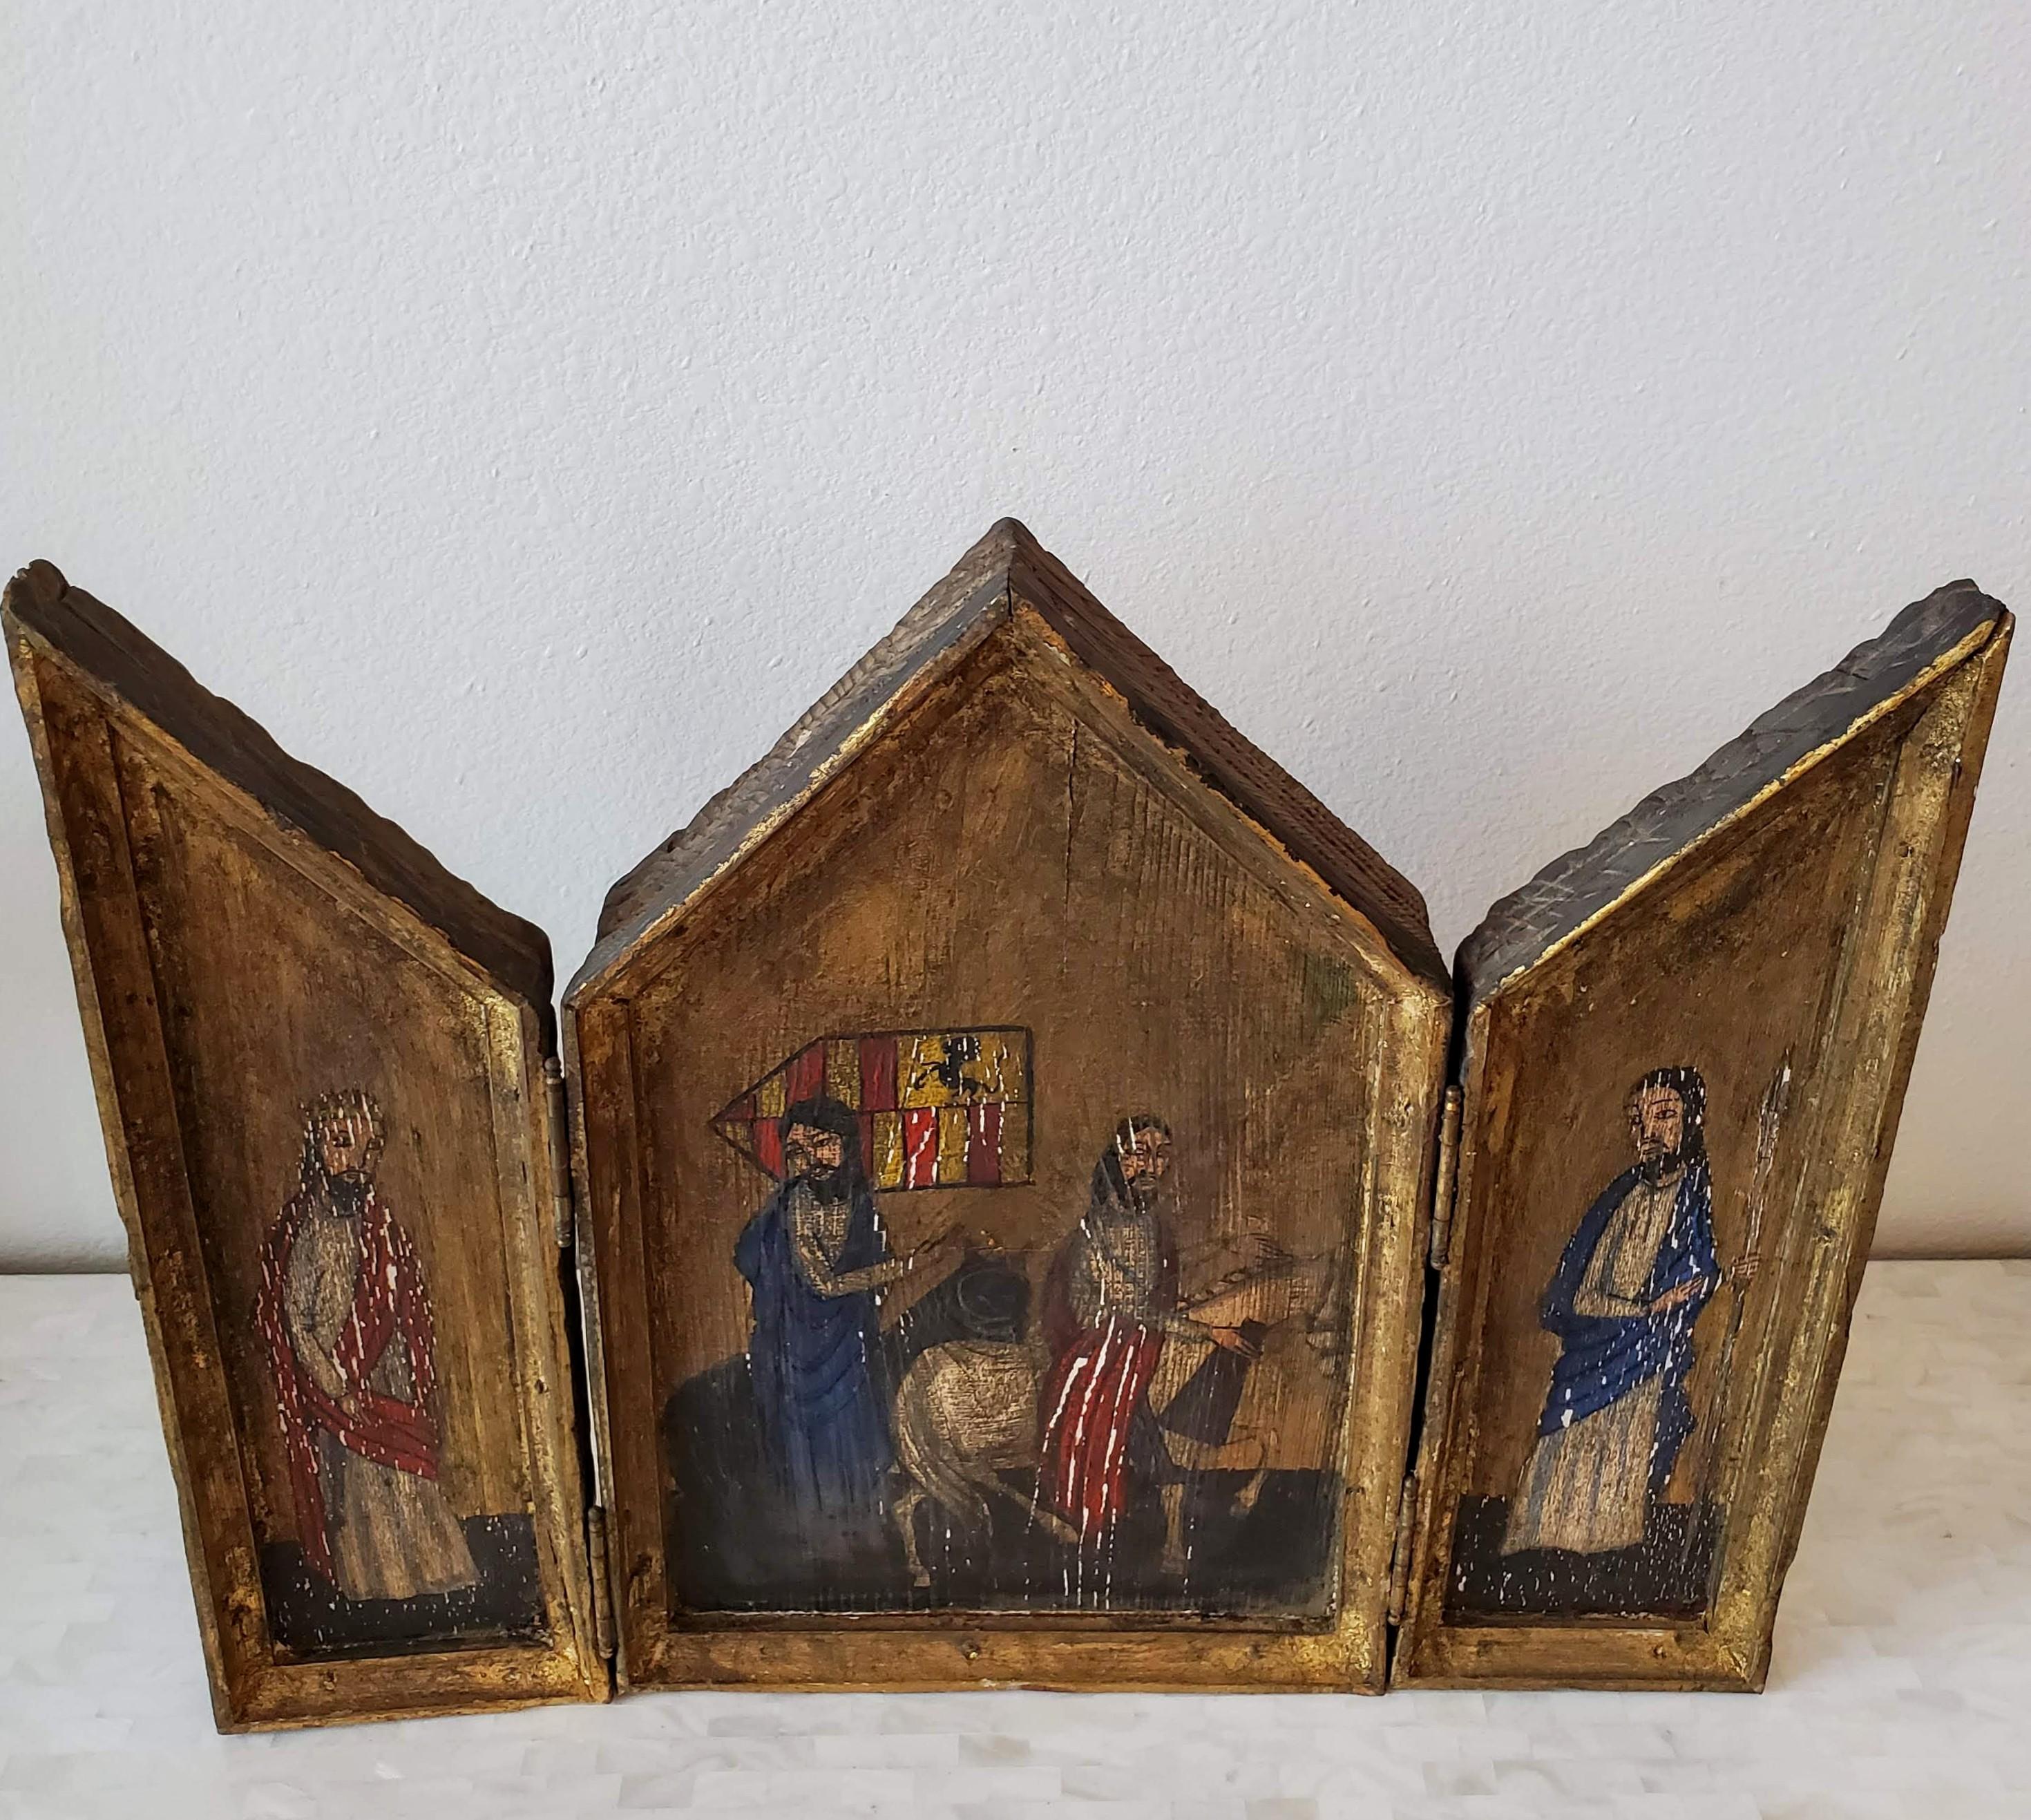 Gothic Revival 19th Century Religious Hand-Painted Altar Triptych Icon Ecclesiastical Art For Sale